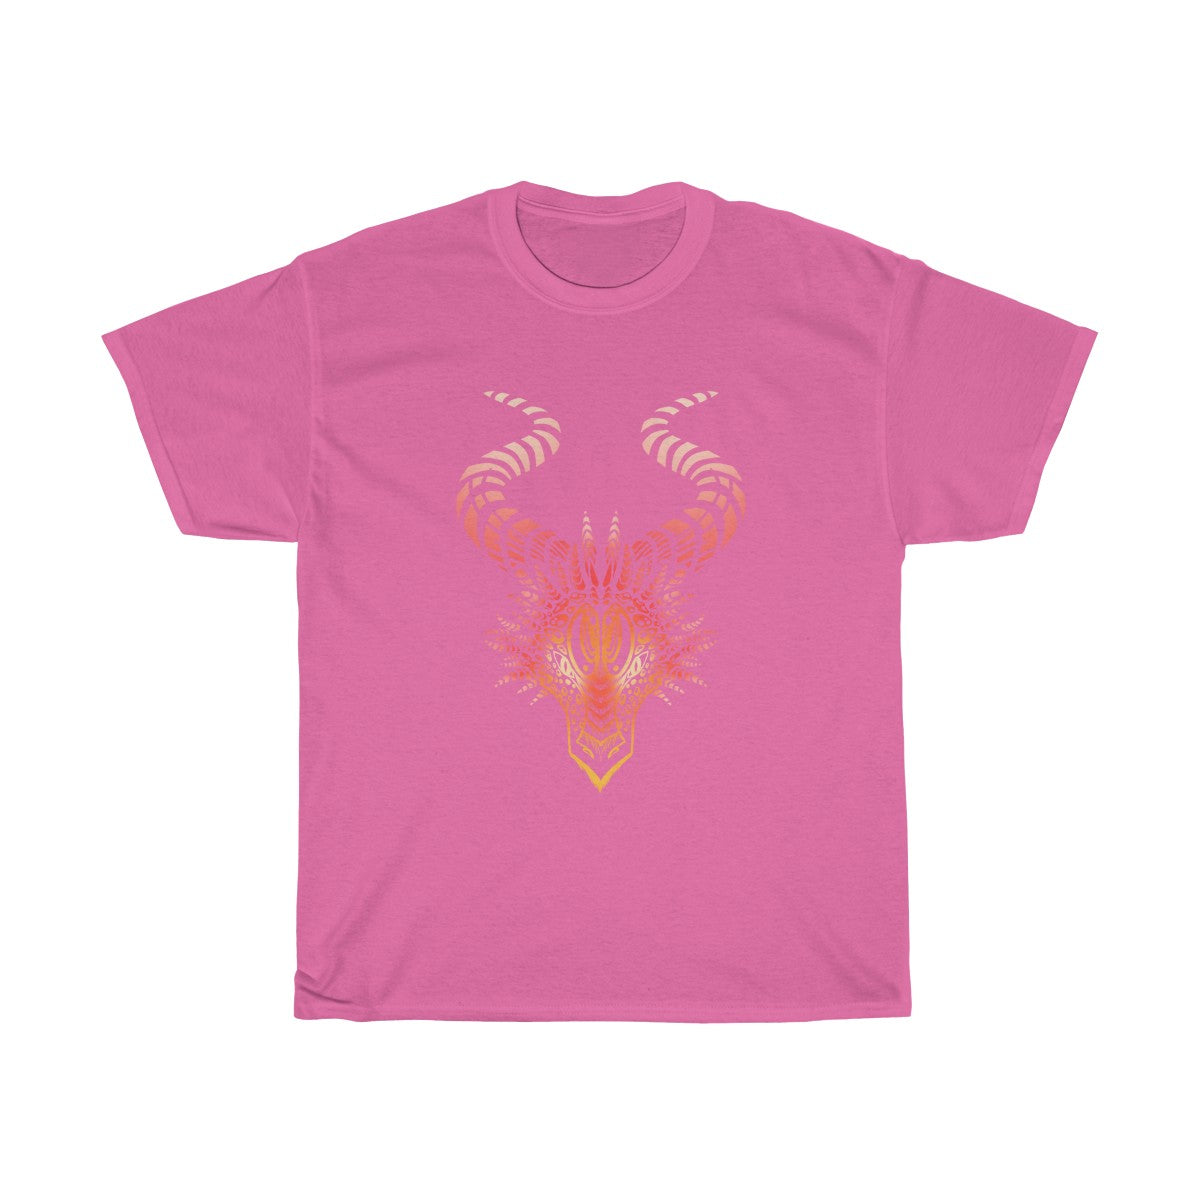 Red Dragon - T-Shirt T-Shirt Dire Creatures Pink S 